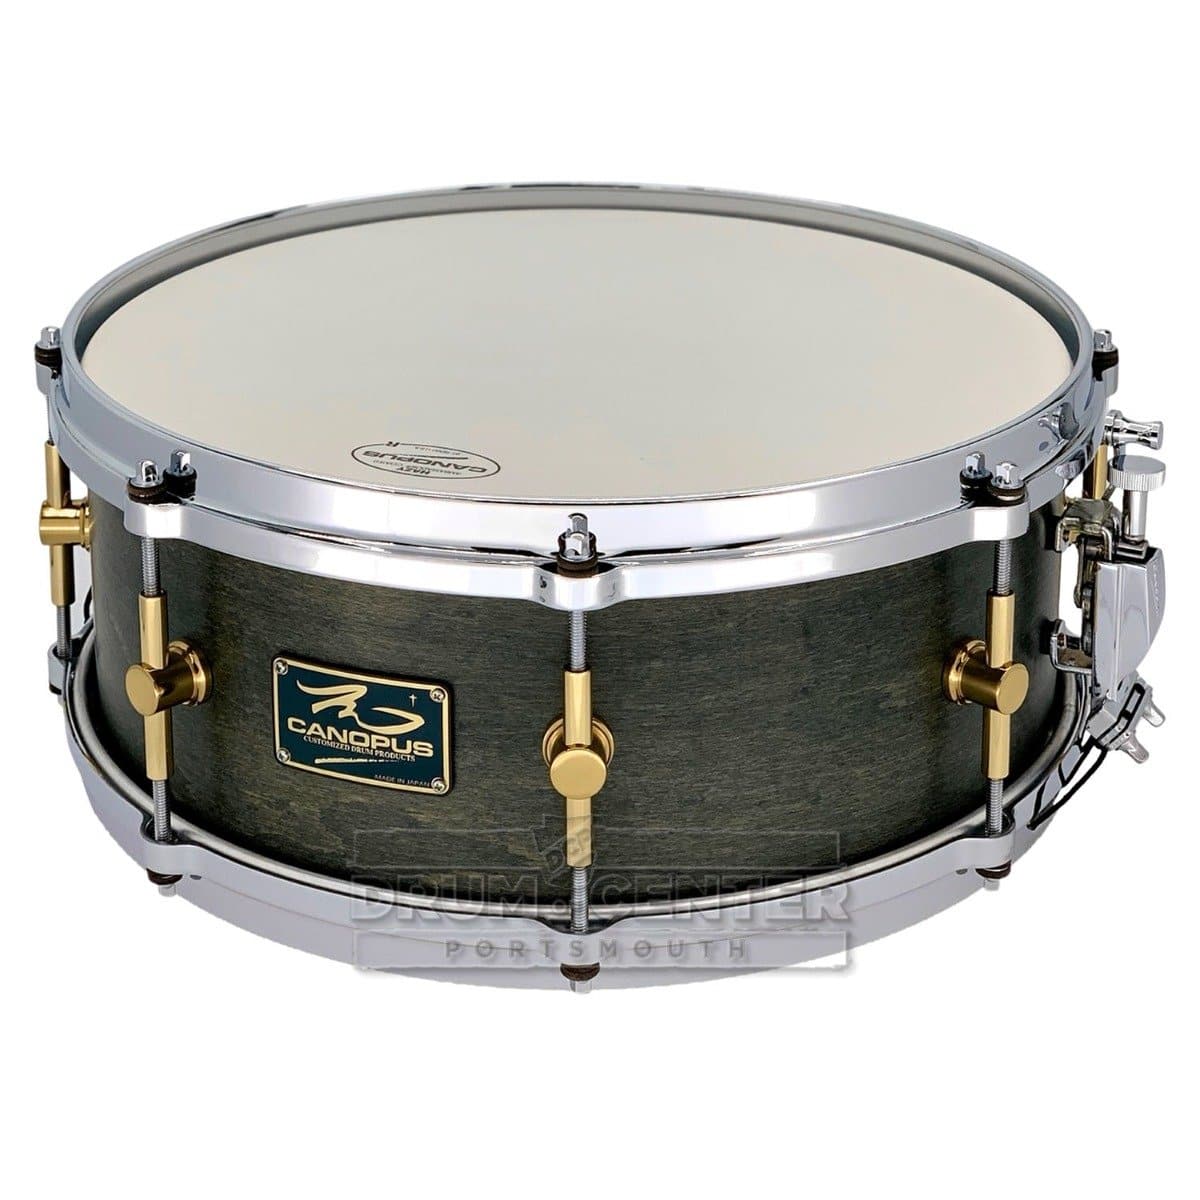 Canopus 'The Maple' 10ply Snare Drum 14x5.5 Black Olive Oil w/Cast